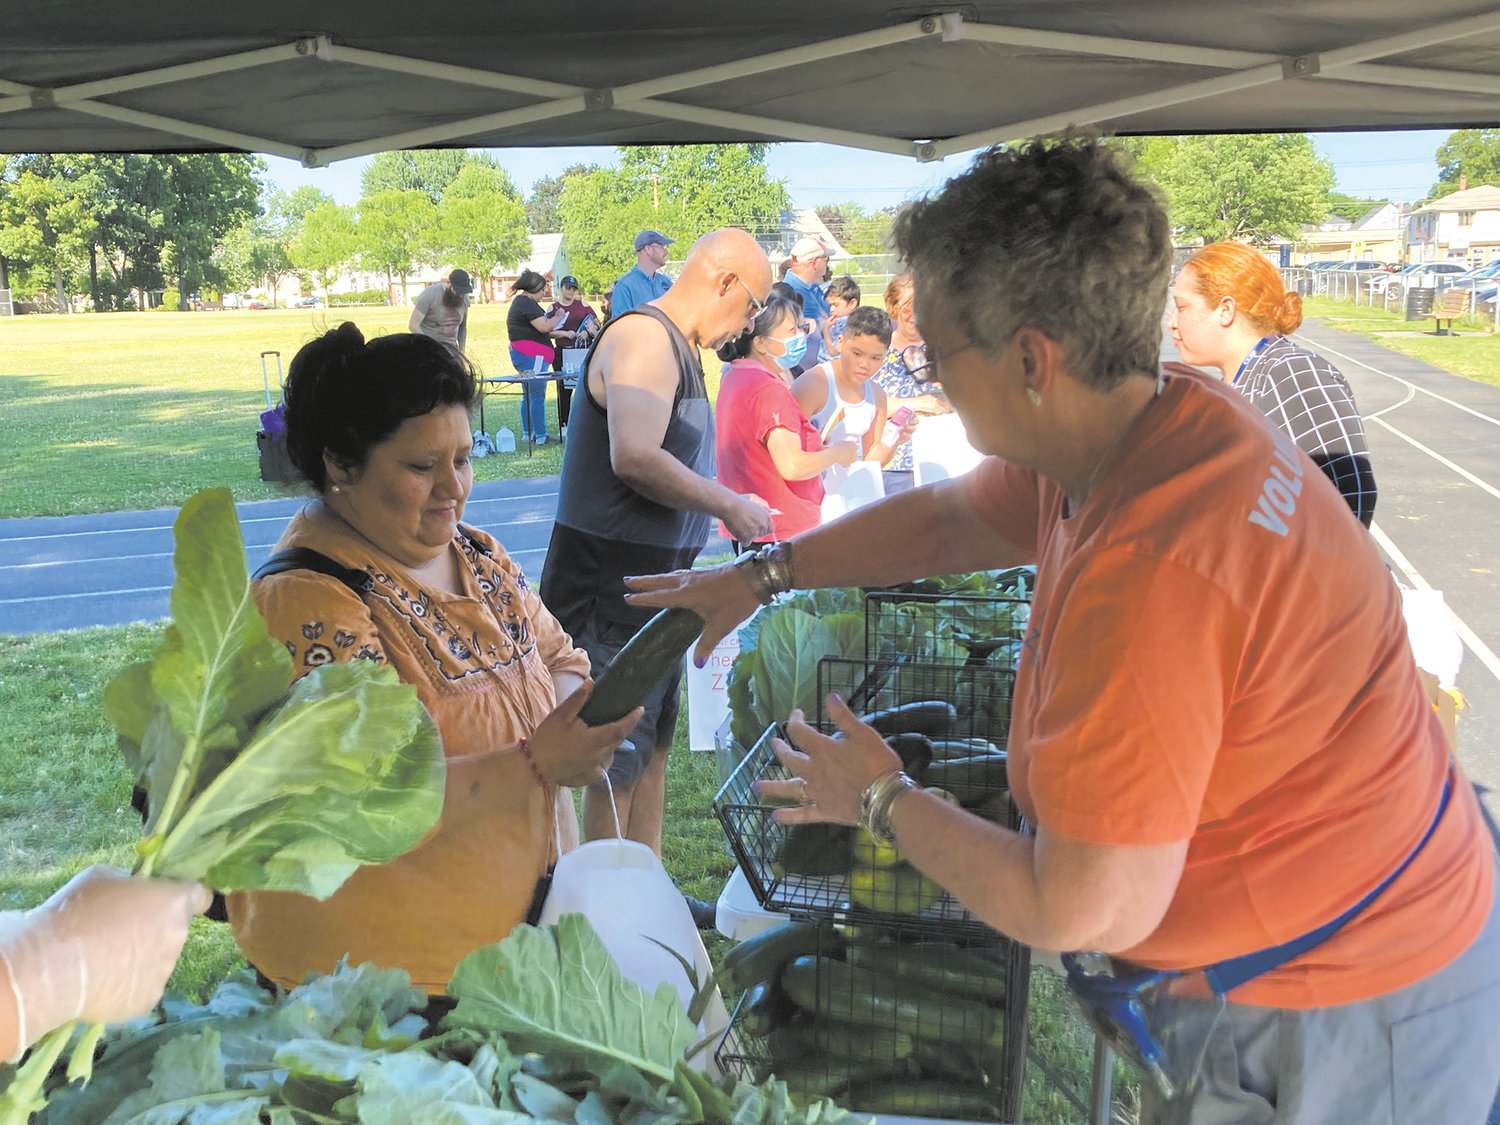 DISTRIBUTING TO FAMILIES: OneCranston HEZ purchases $1,000 of food each week to distribute to families. Last year, the organization gave away 1,300 bags of produce to Cranston residents. (Herald photo)